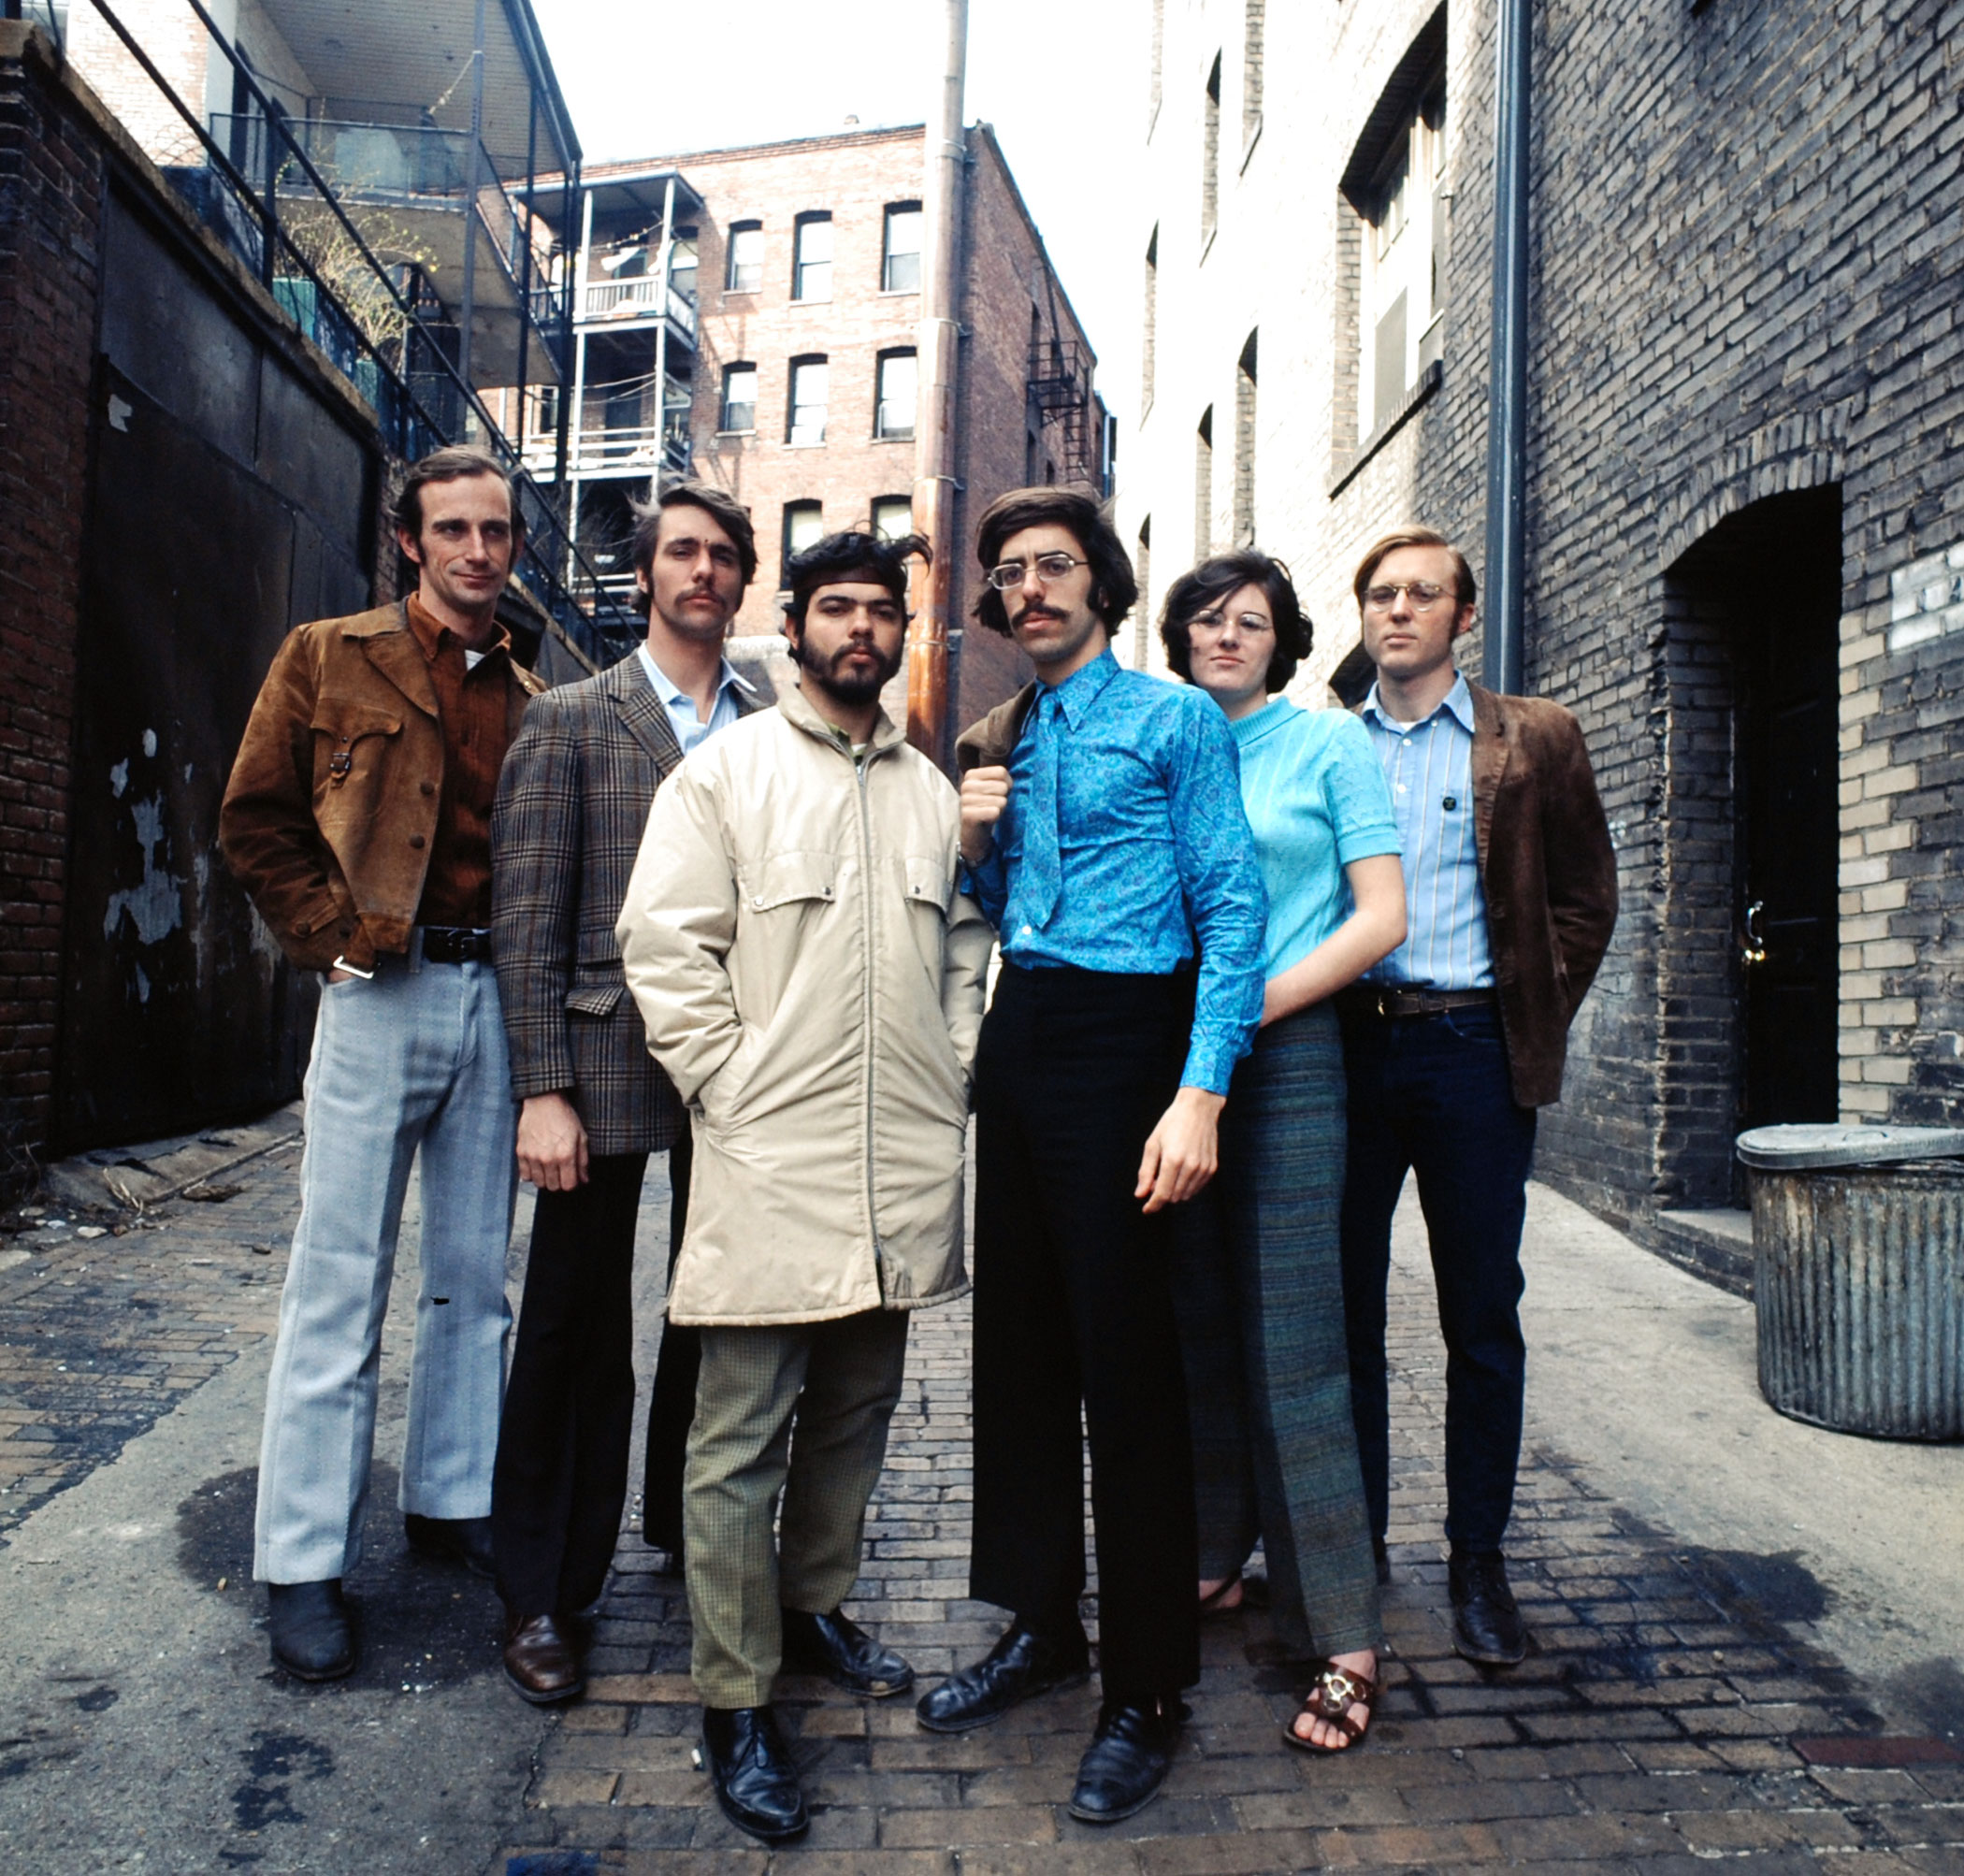 In a Washington D. C. ghetto, key Earth Day staffers (from left) Denis Hayes, Andrew Garling, Arturo Sandoval, Stephen Cotton, Barbara Reid and Bryce Hamilton gather for a group portrait.